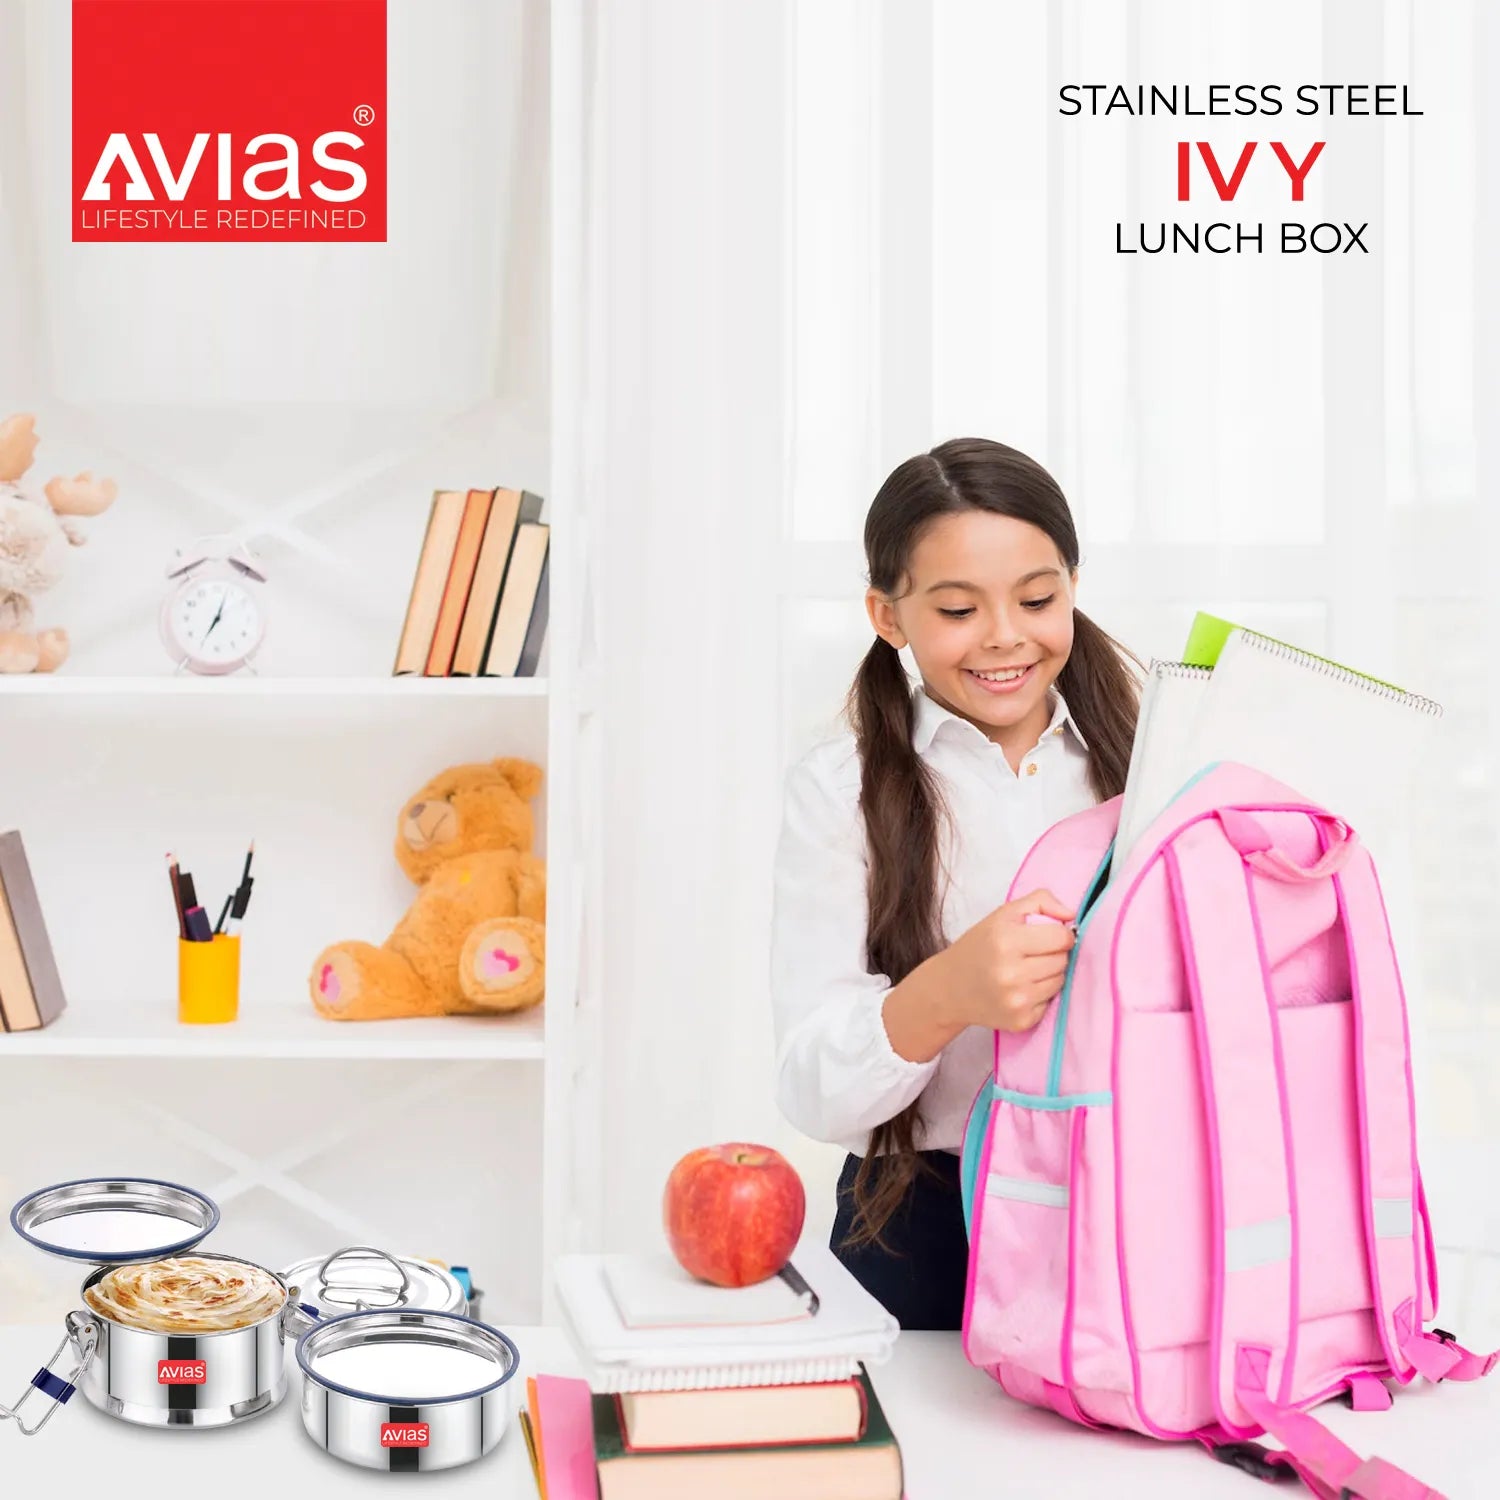 AVIAS Ivy Stainless Steel Lunch box for school